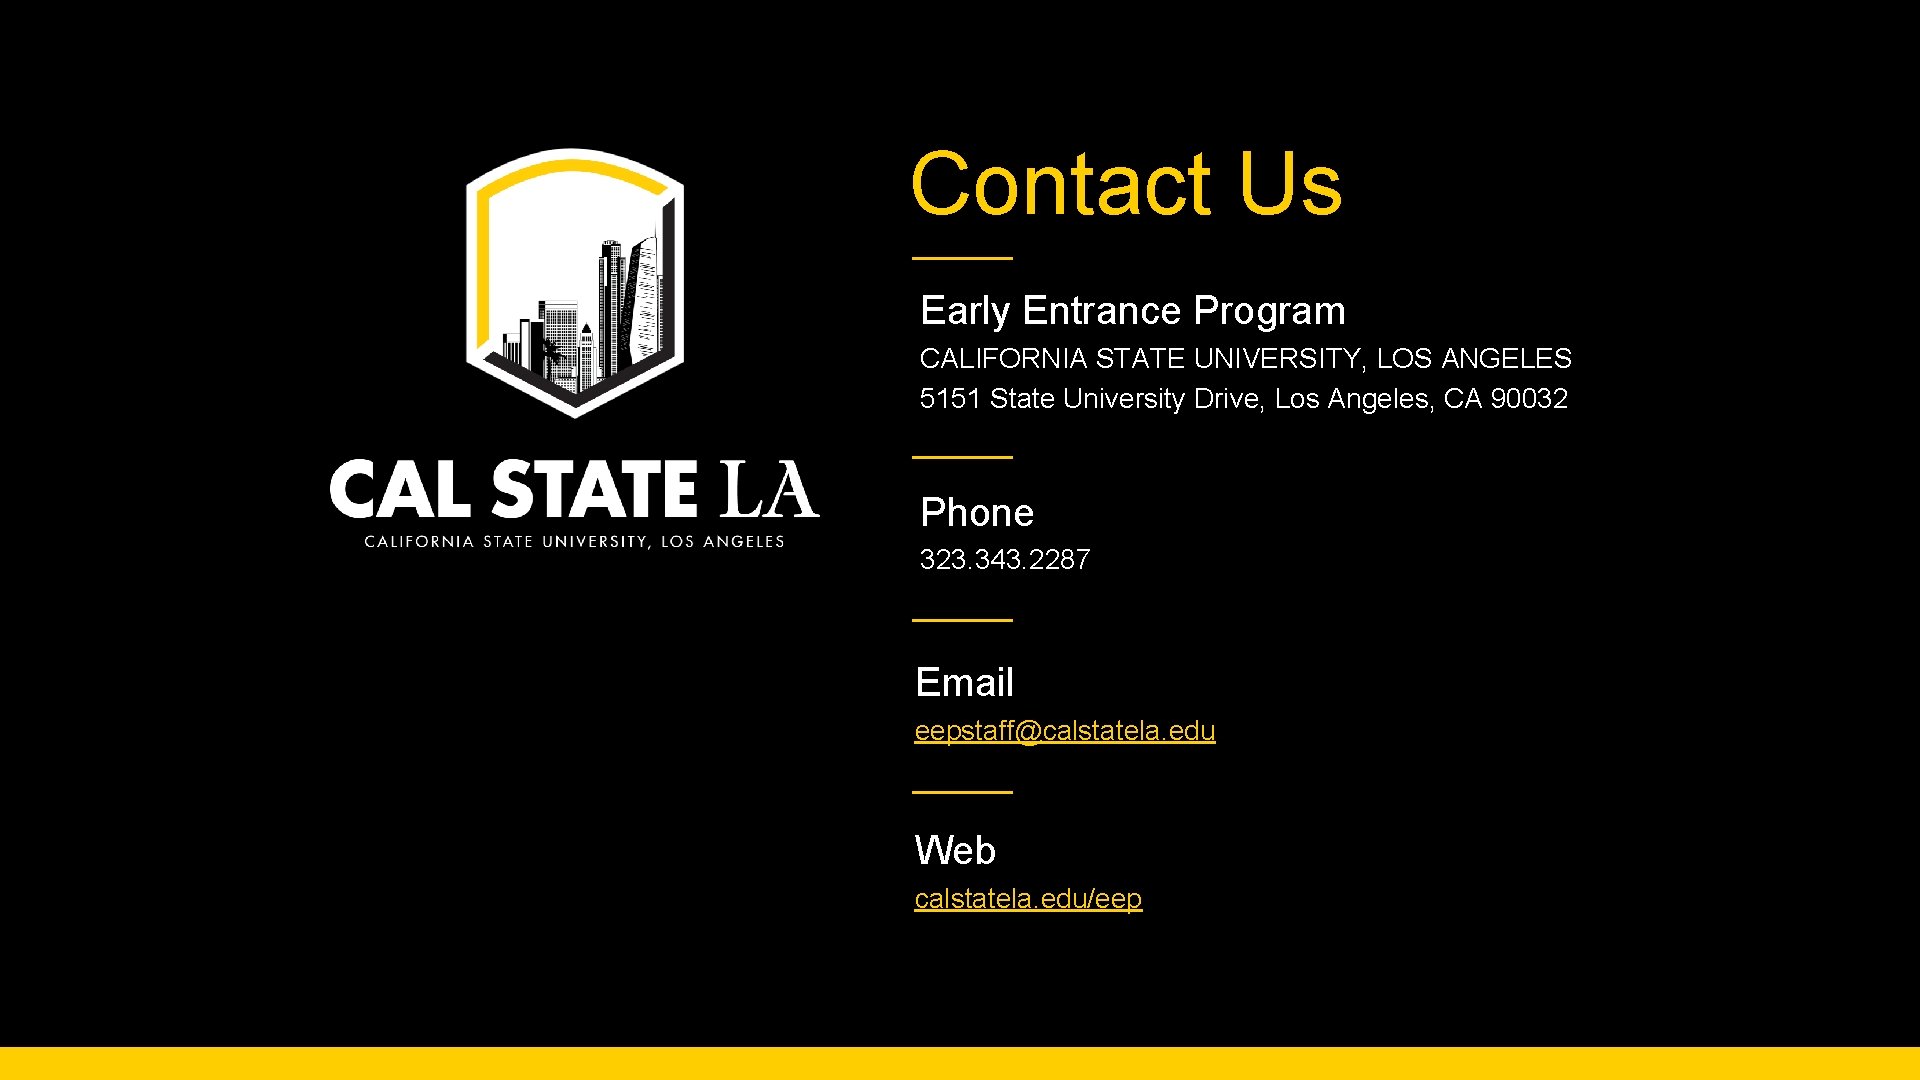 Contact Us Early Entrance Program CALIFORNIA STATE UNIVERSITY, LOS ANGELES 5151 State University Drive,